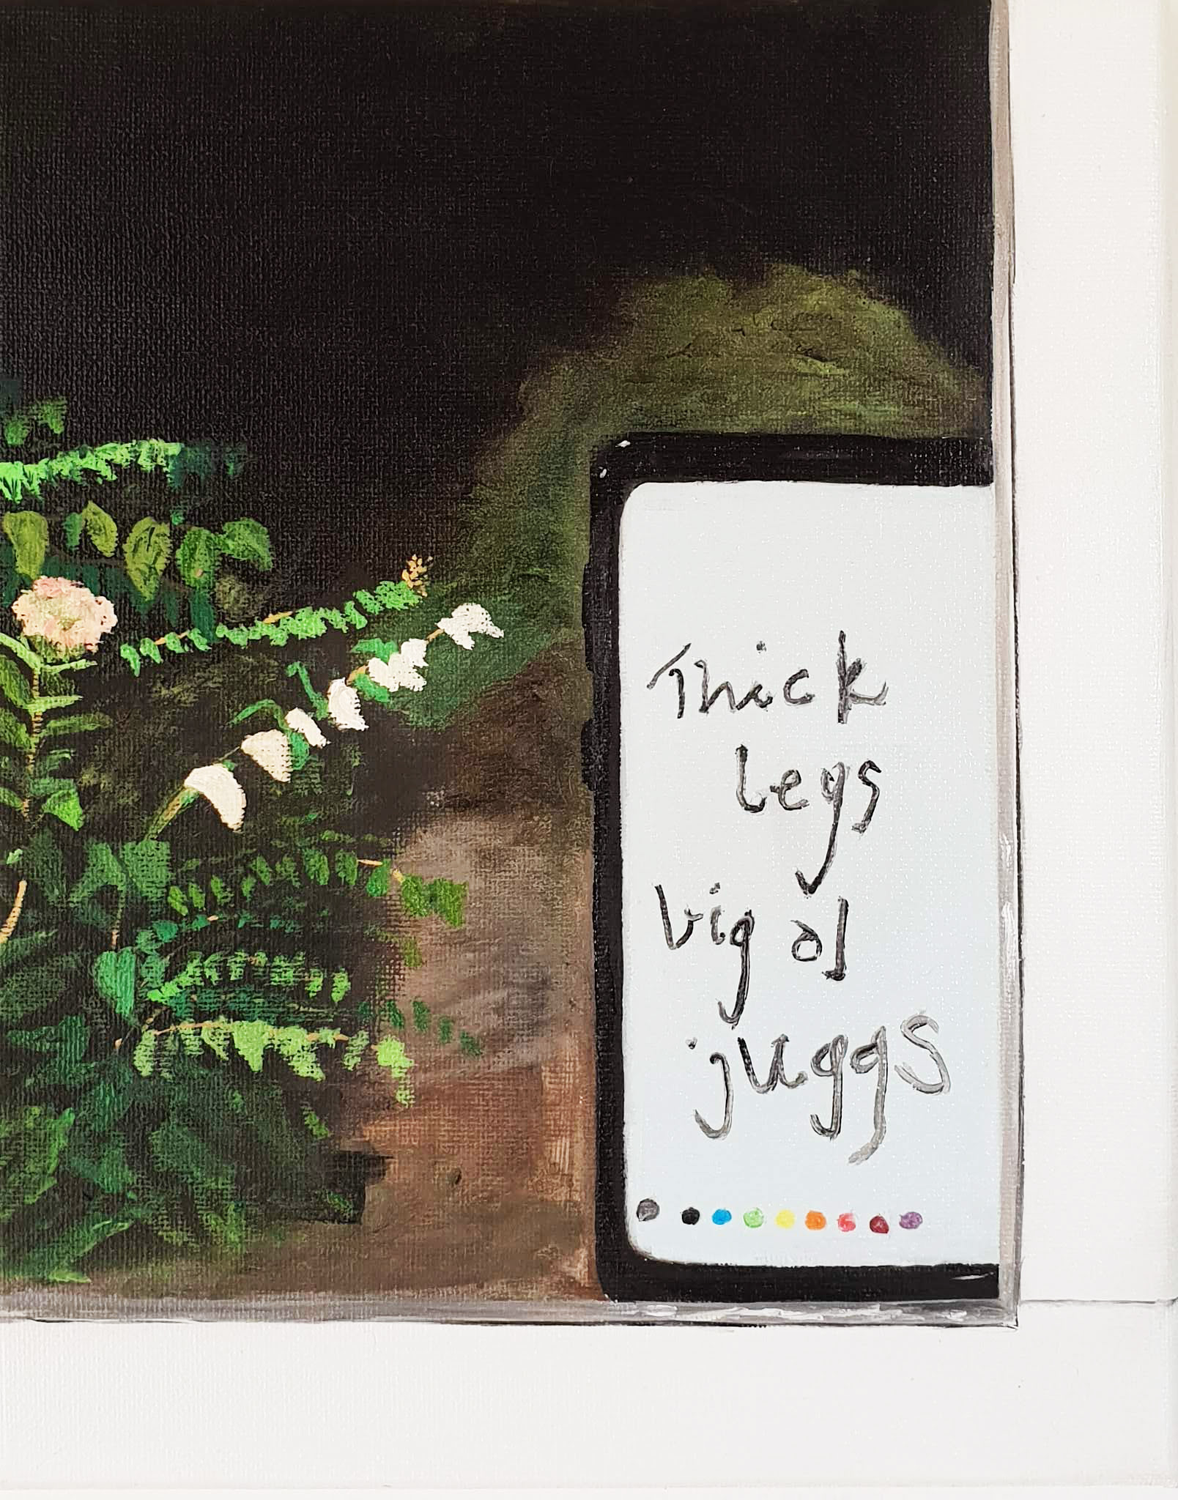 A garden scene with a mobile device pressed against the window, with 'Thick legs, big ol juggs' transcribed across the screen.